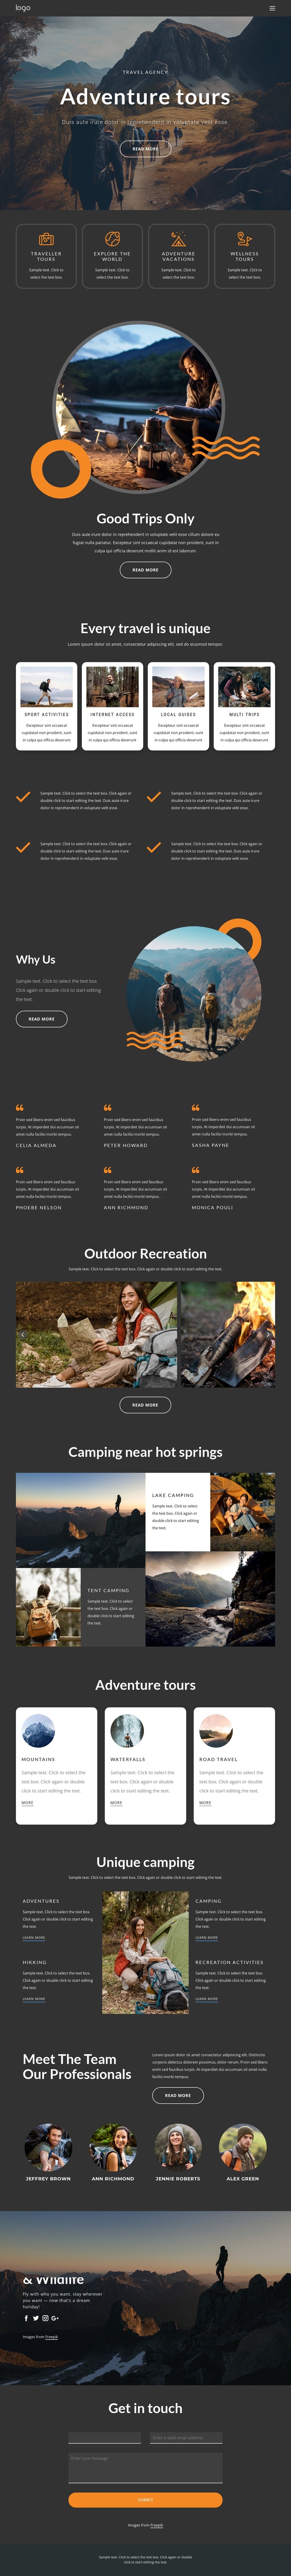 About our adventure tours Joomla Template